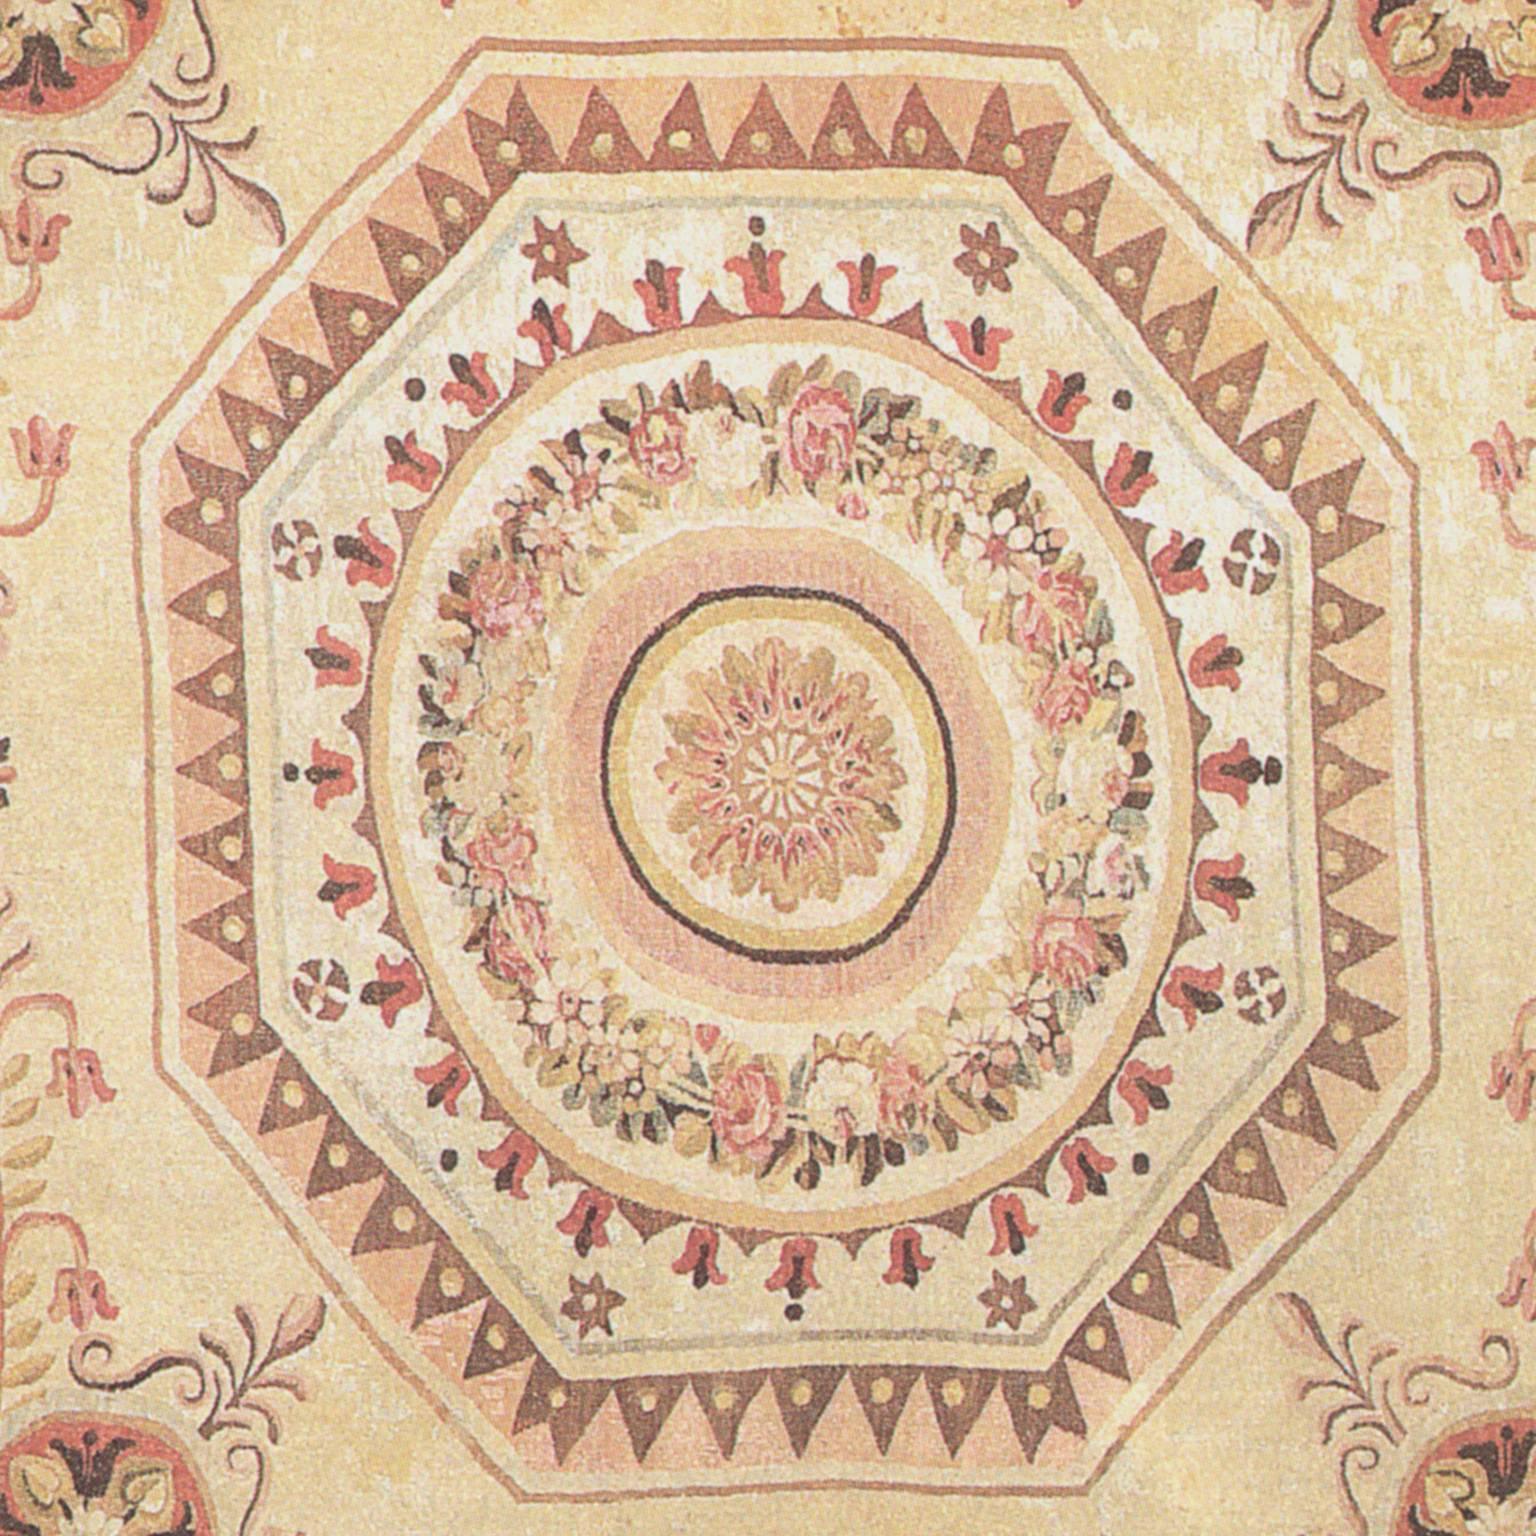 Hand-Woven French Aubusson Rug, 1800